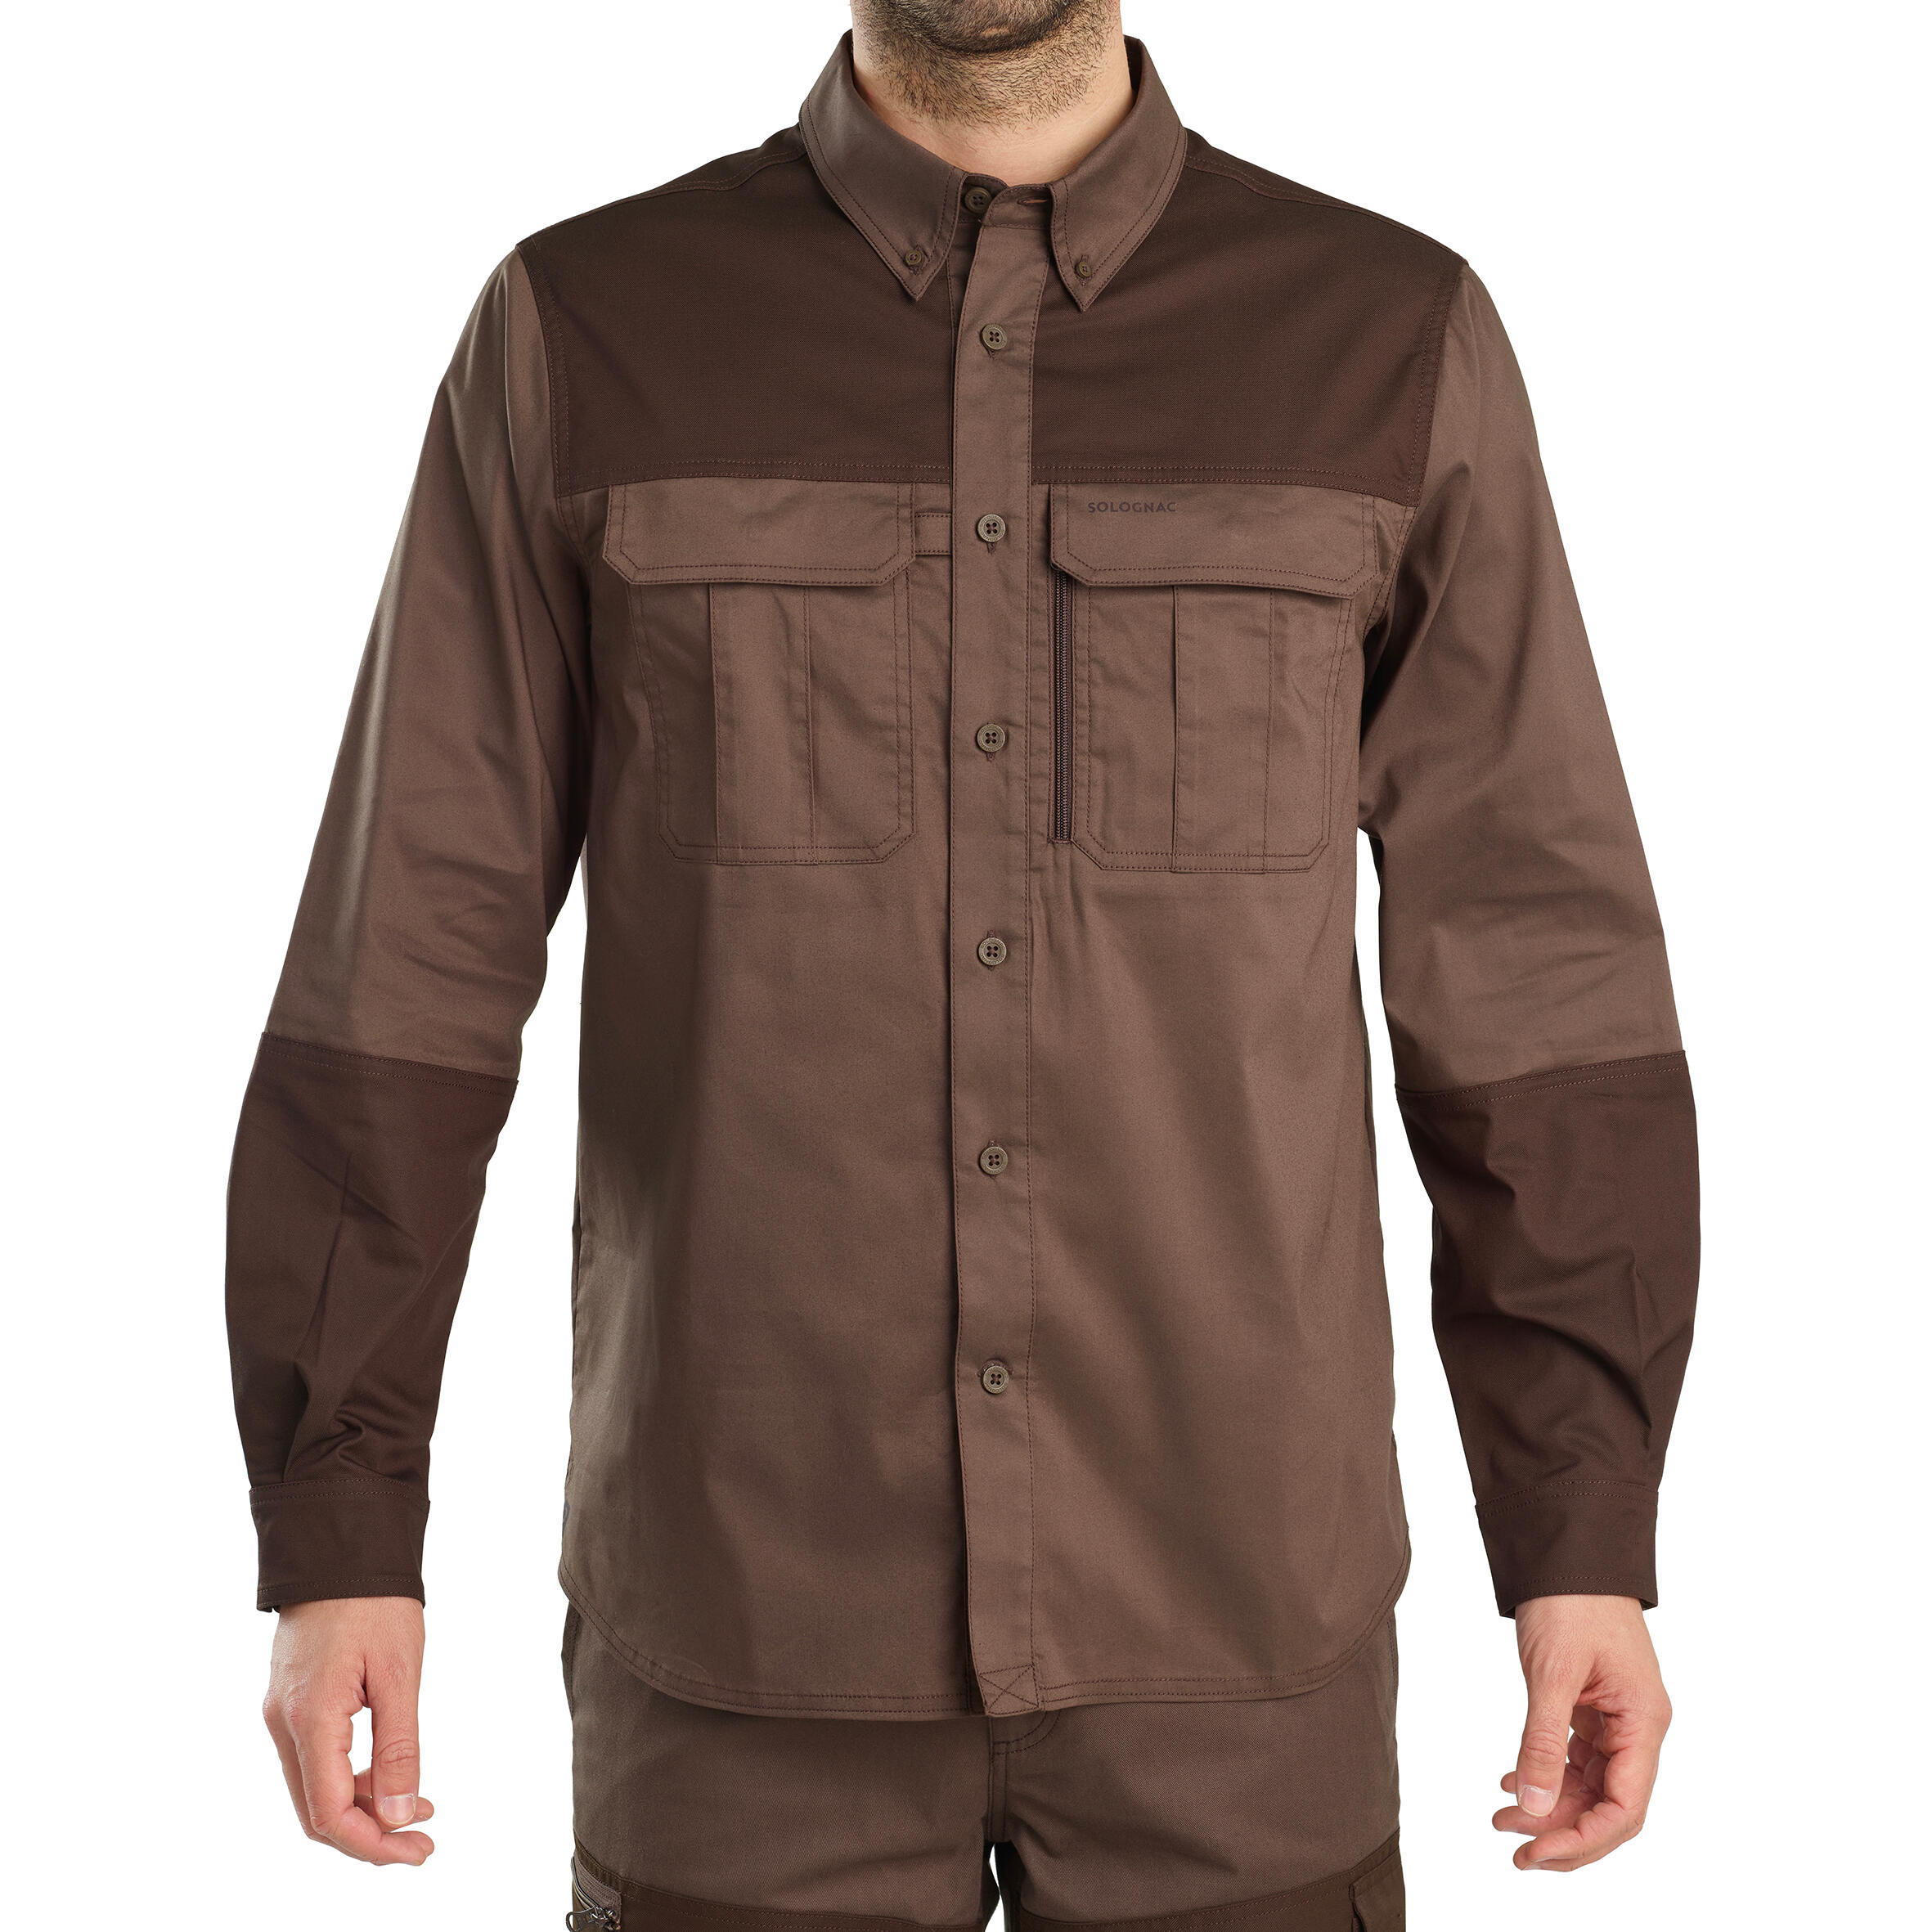 Men's Country Sport Long-Sleeved Comfortable Resistant Cotton Shirt - 500 Brown 2/13